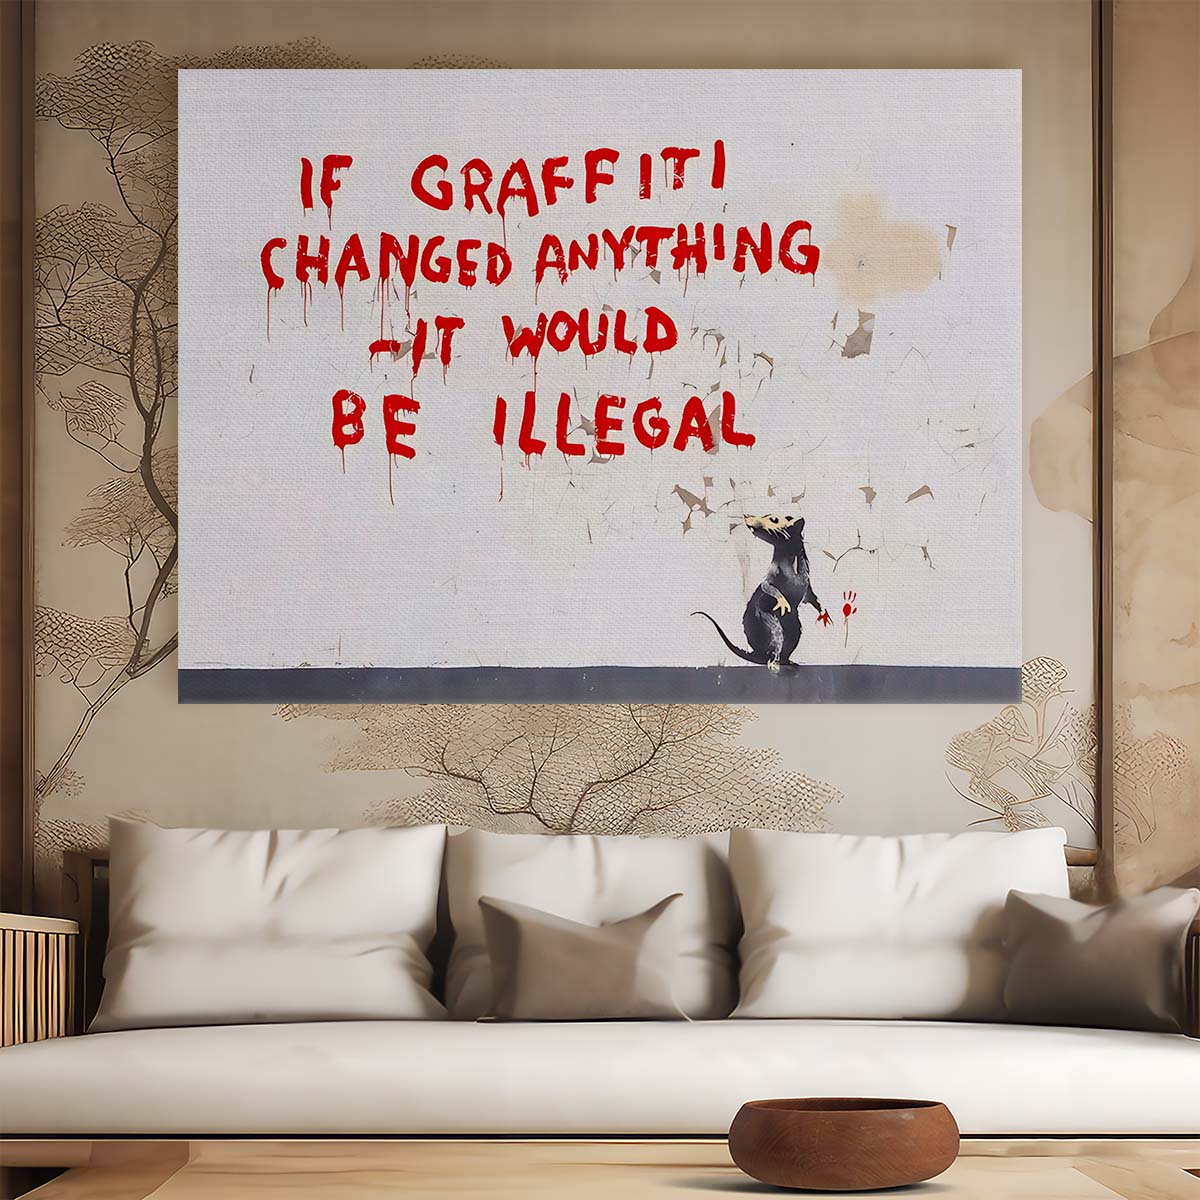 If Graffiti Changed Anything It Would Be Illegal Wall Art by Luxuriance Designs. Made in USA.